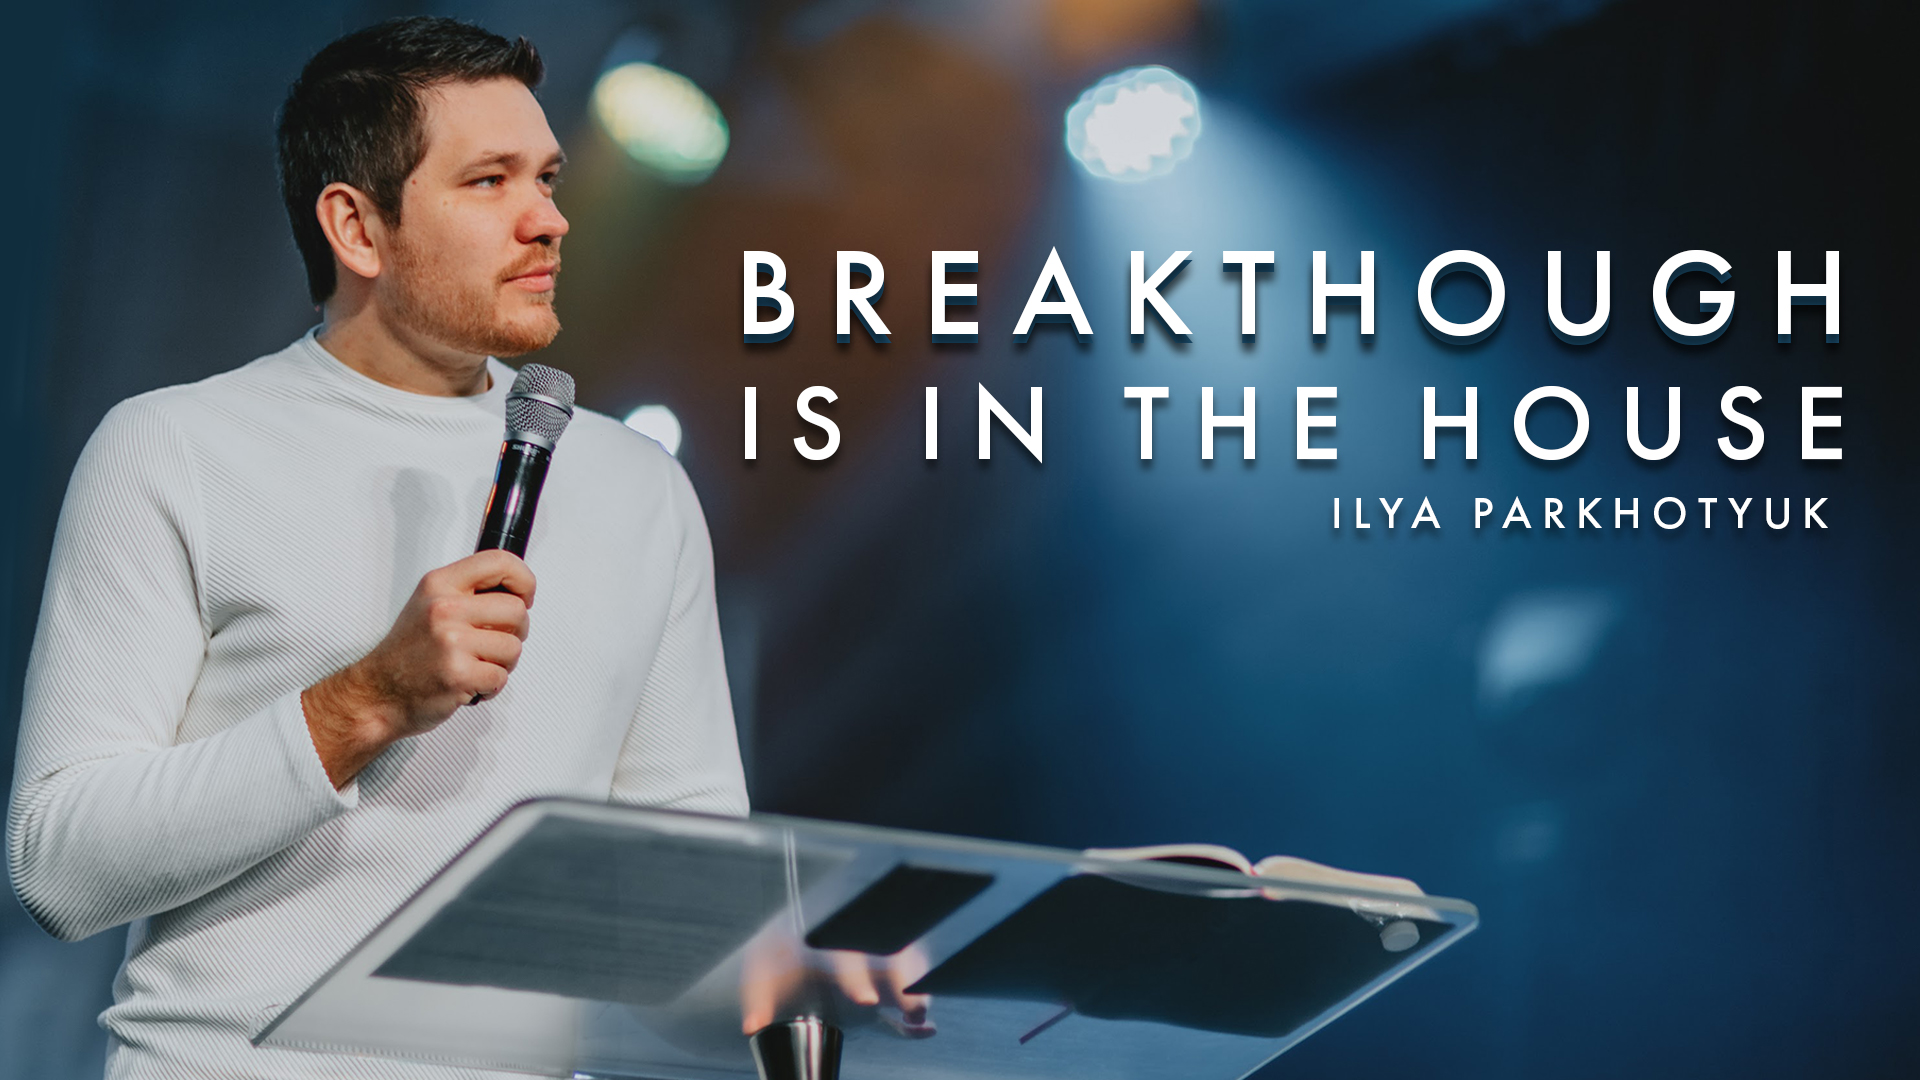 Featured image for “Breakthrough is in the House”